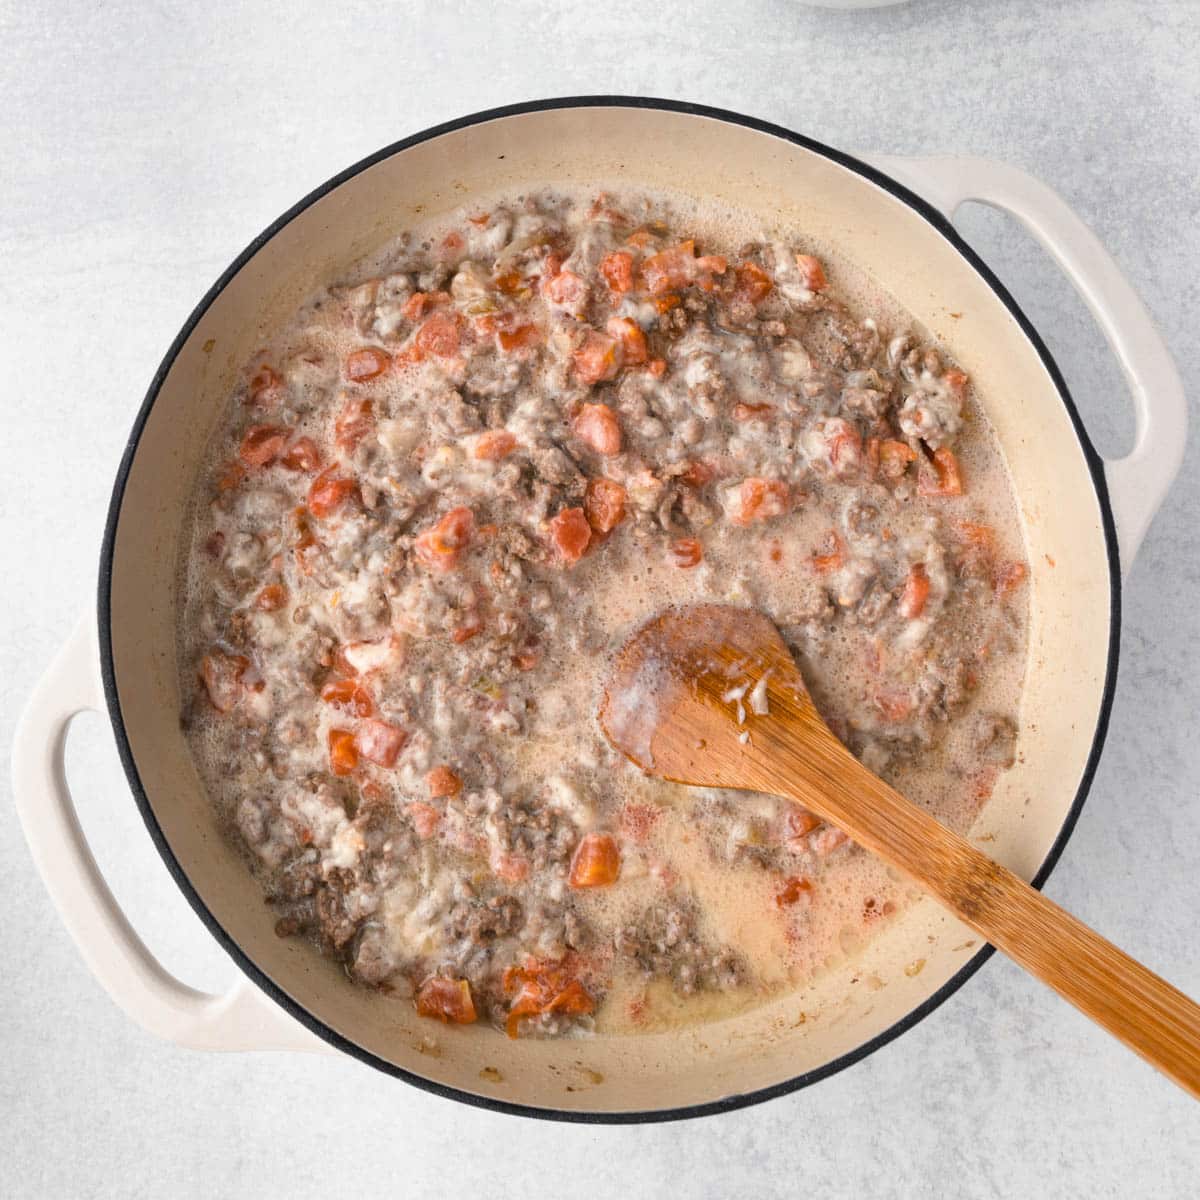 ground beef, tomatoes and milk in a skillet